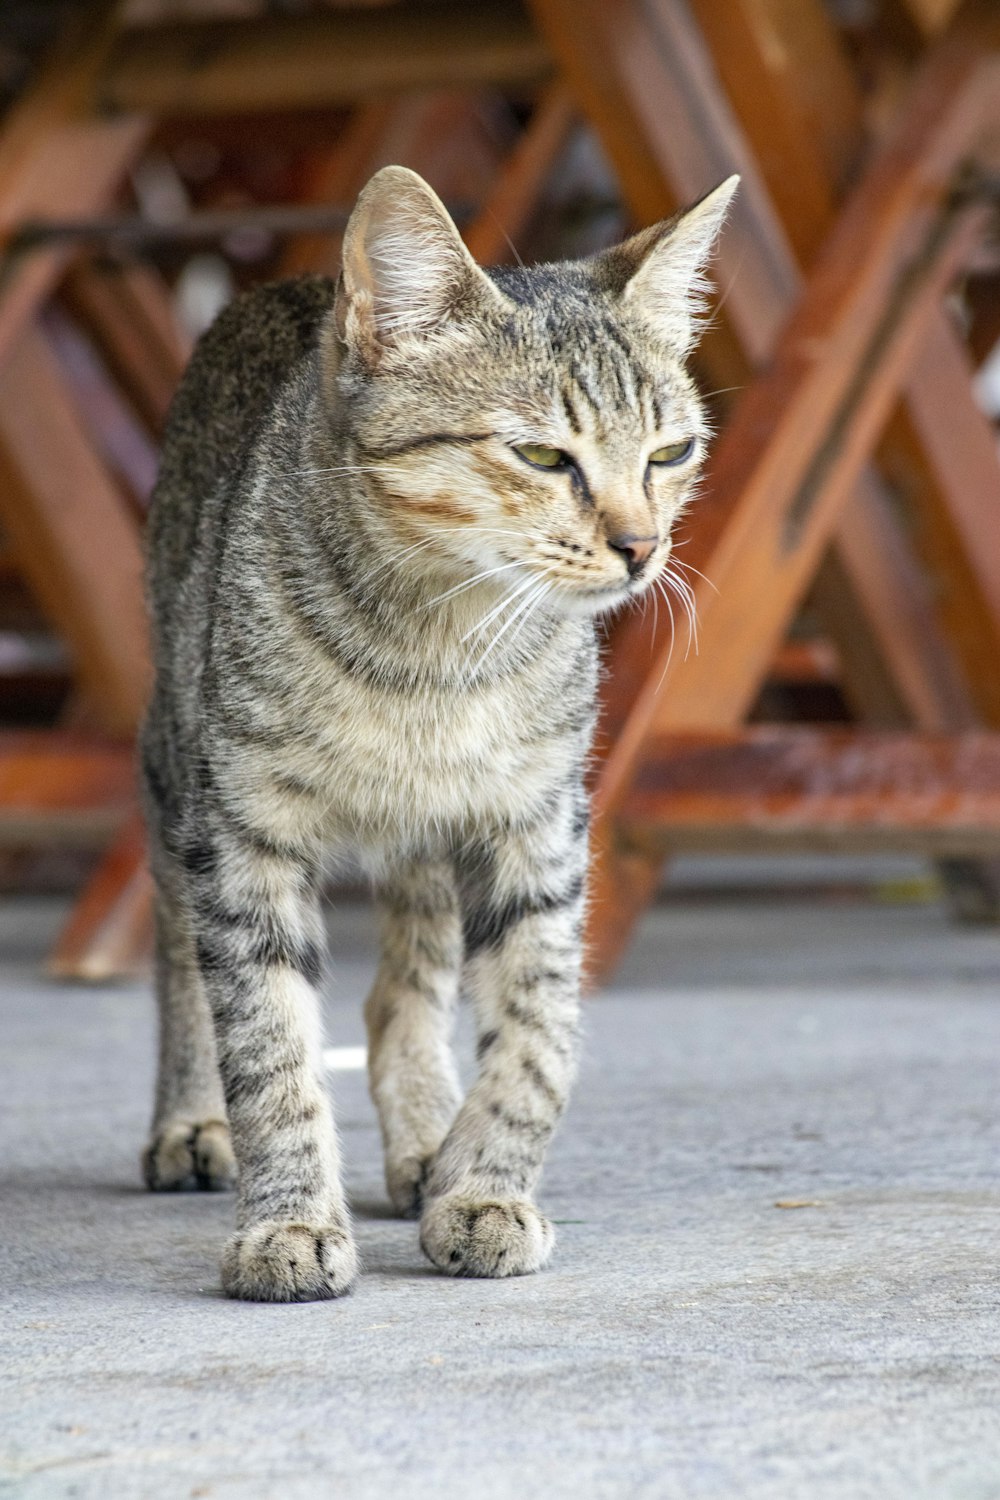 a cat walking on a sidewalk next to a wooden bench